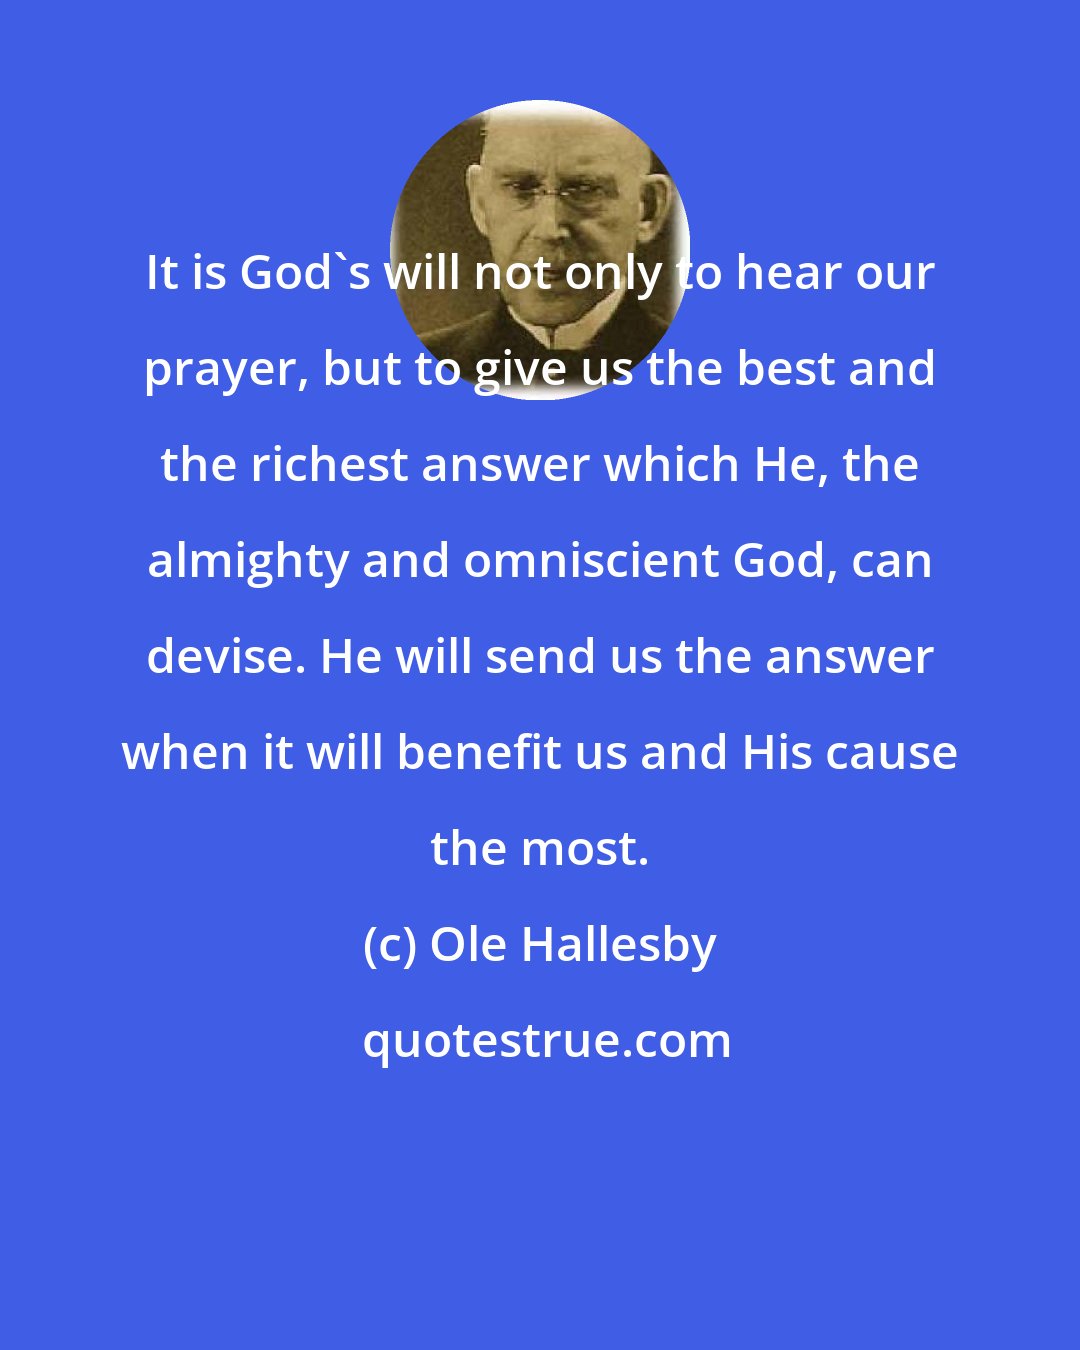 Ole Hallesby: It is God's will not only to hear our prayer, but to give us the best and the richest answer which He, the almighty and omniscient God, can devise. He will send us the answer when it will benefit us and His cause the most.